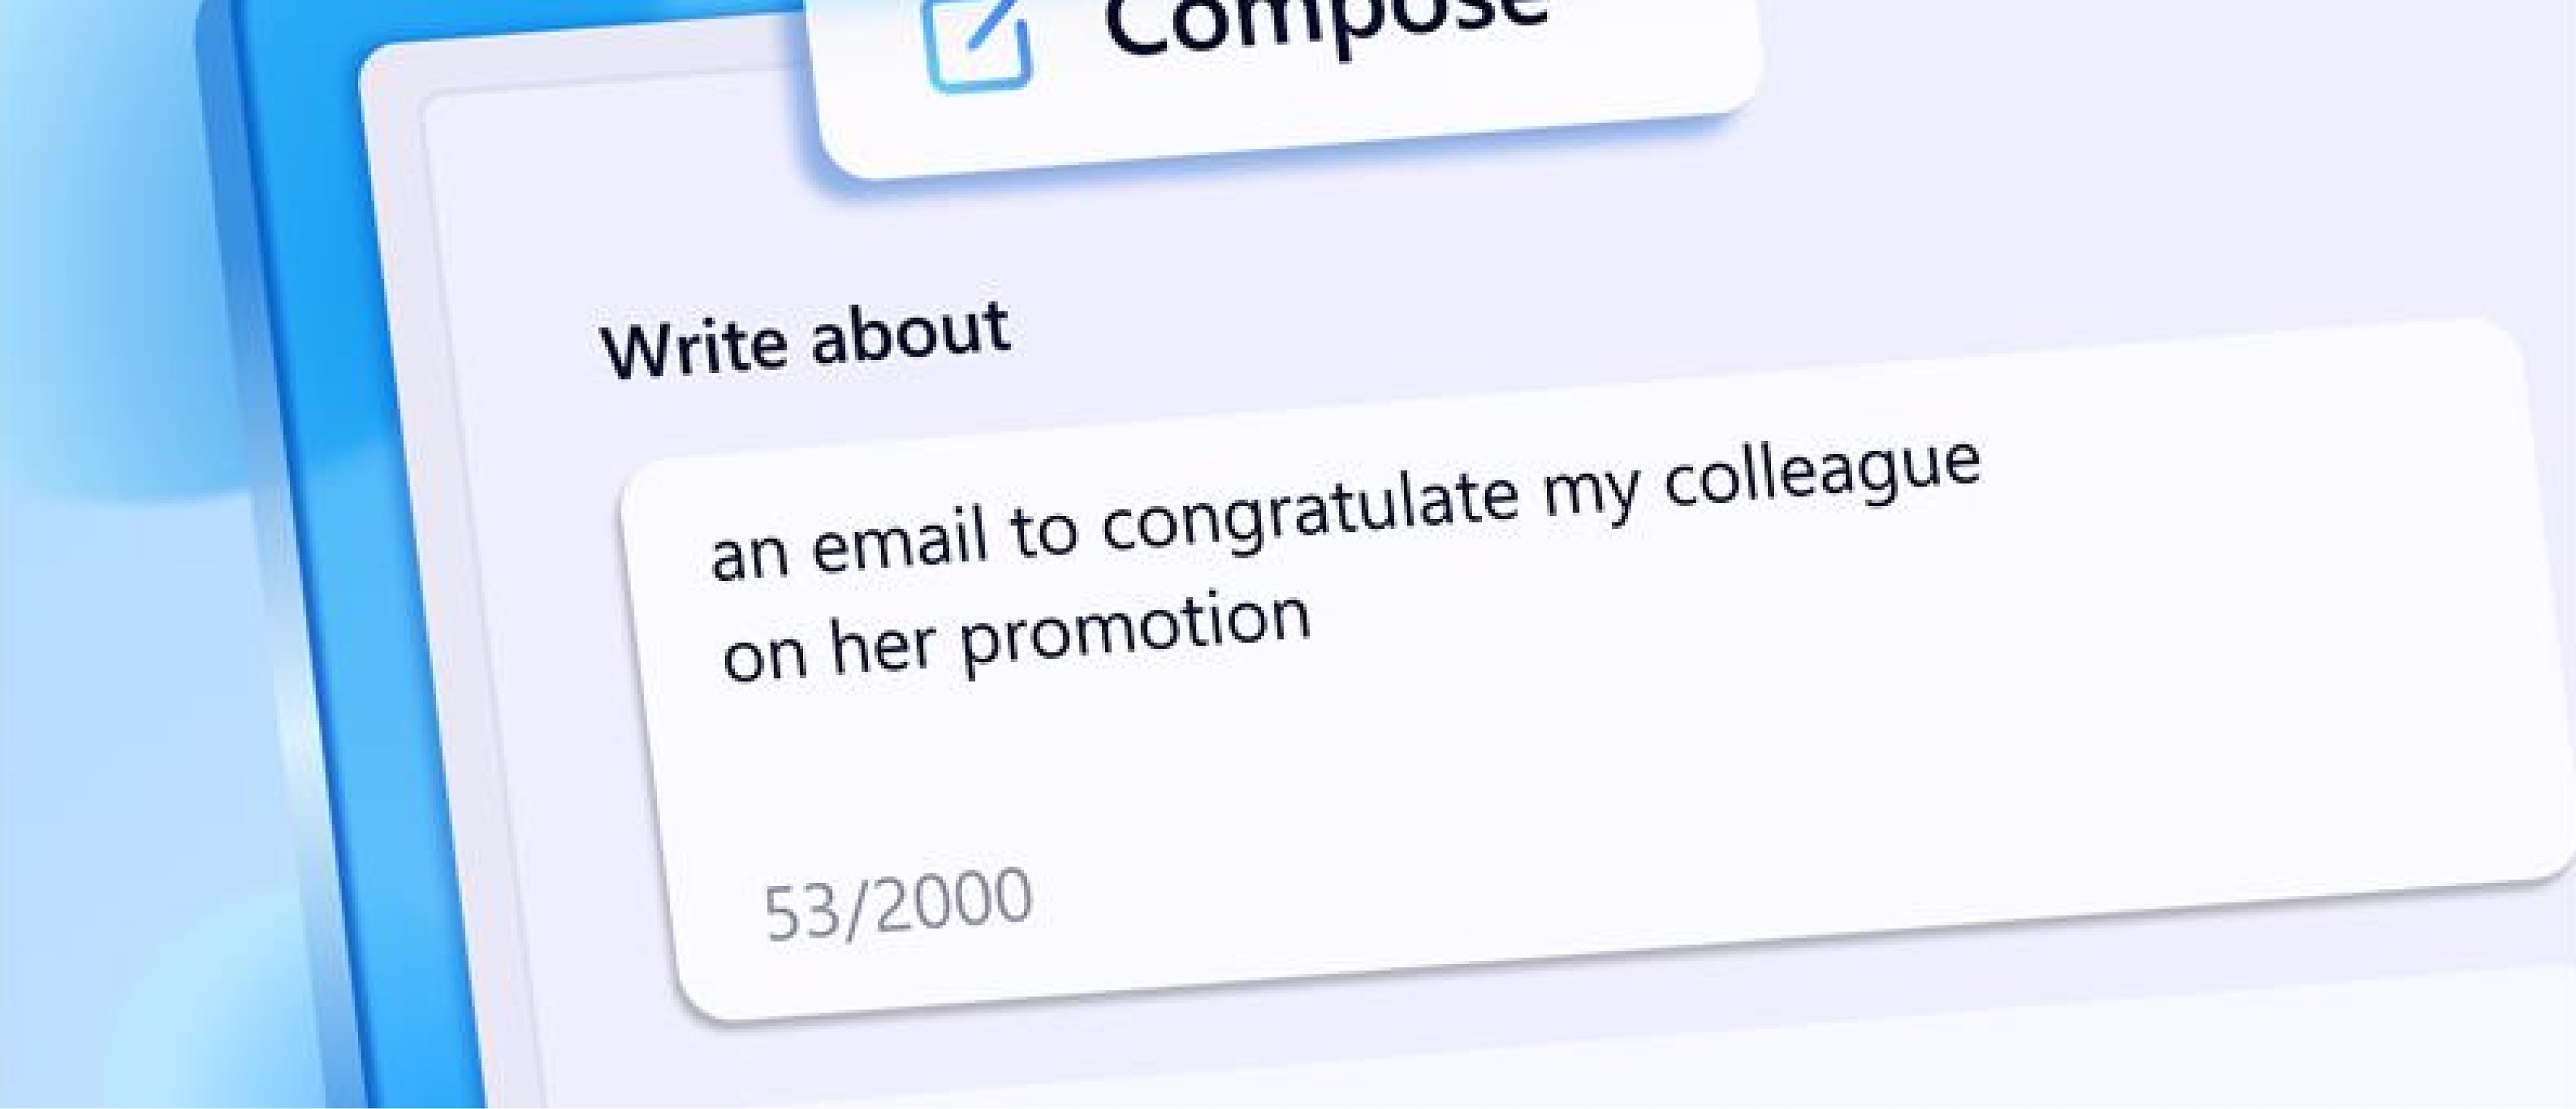 A screenshot of a prompt to an AI to write an email congratulating a colleague on her promotion